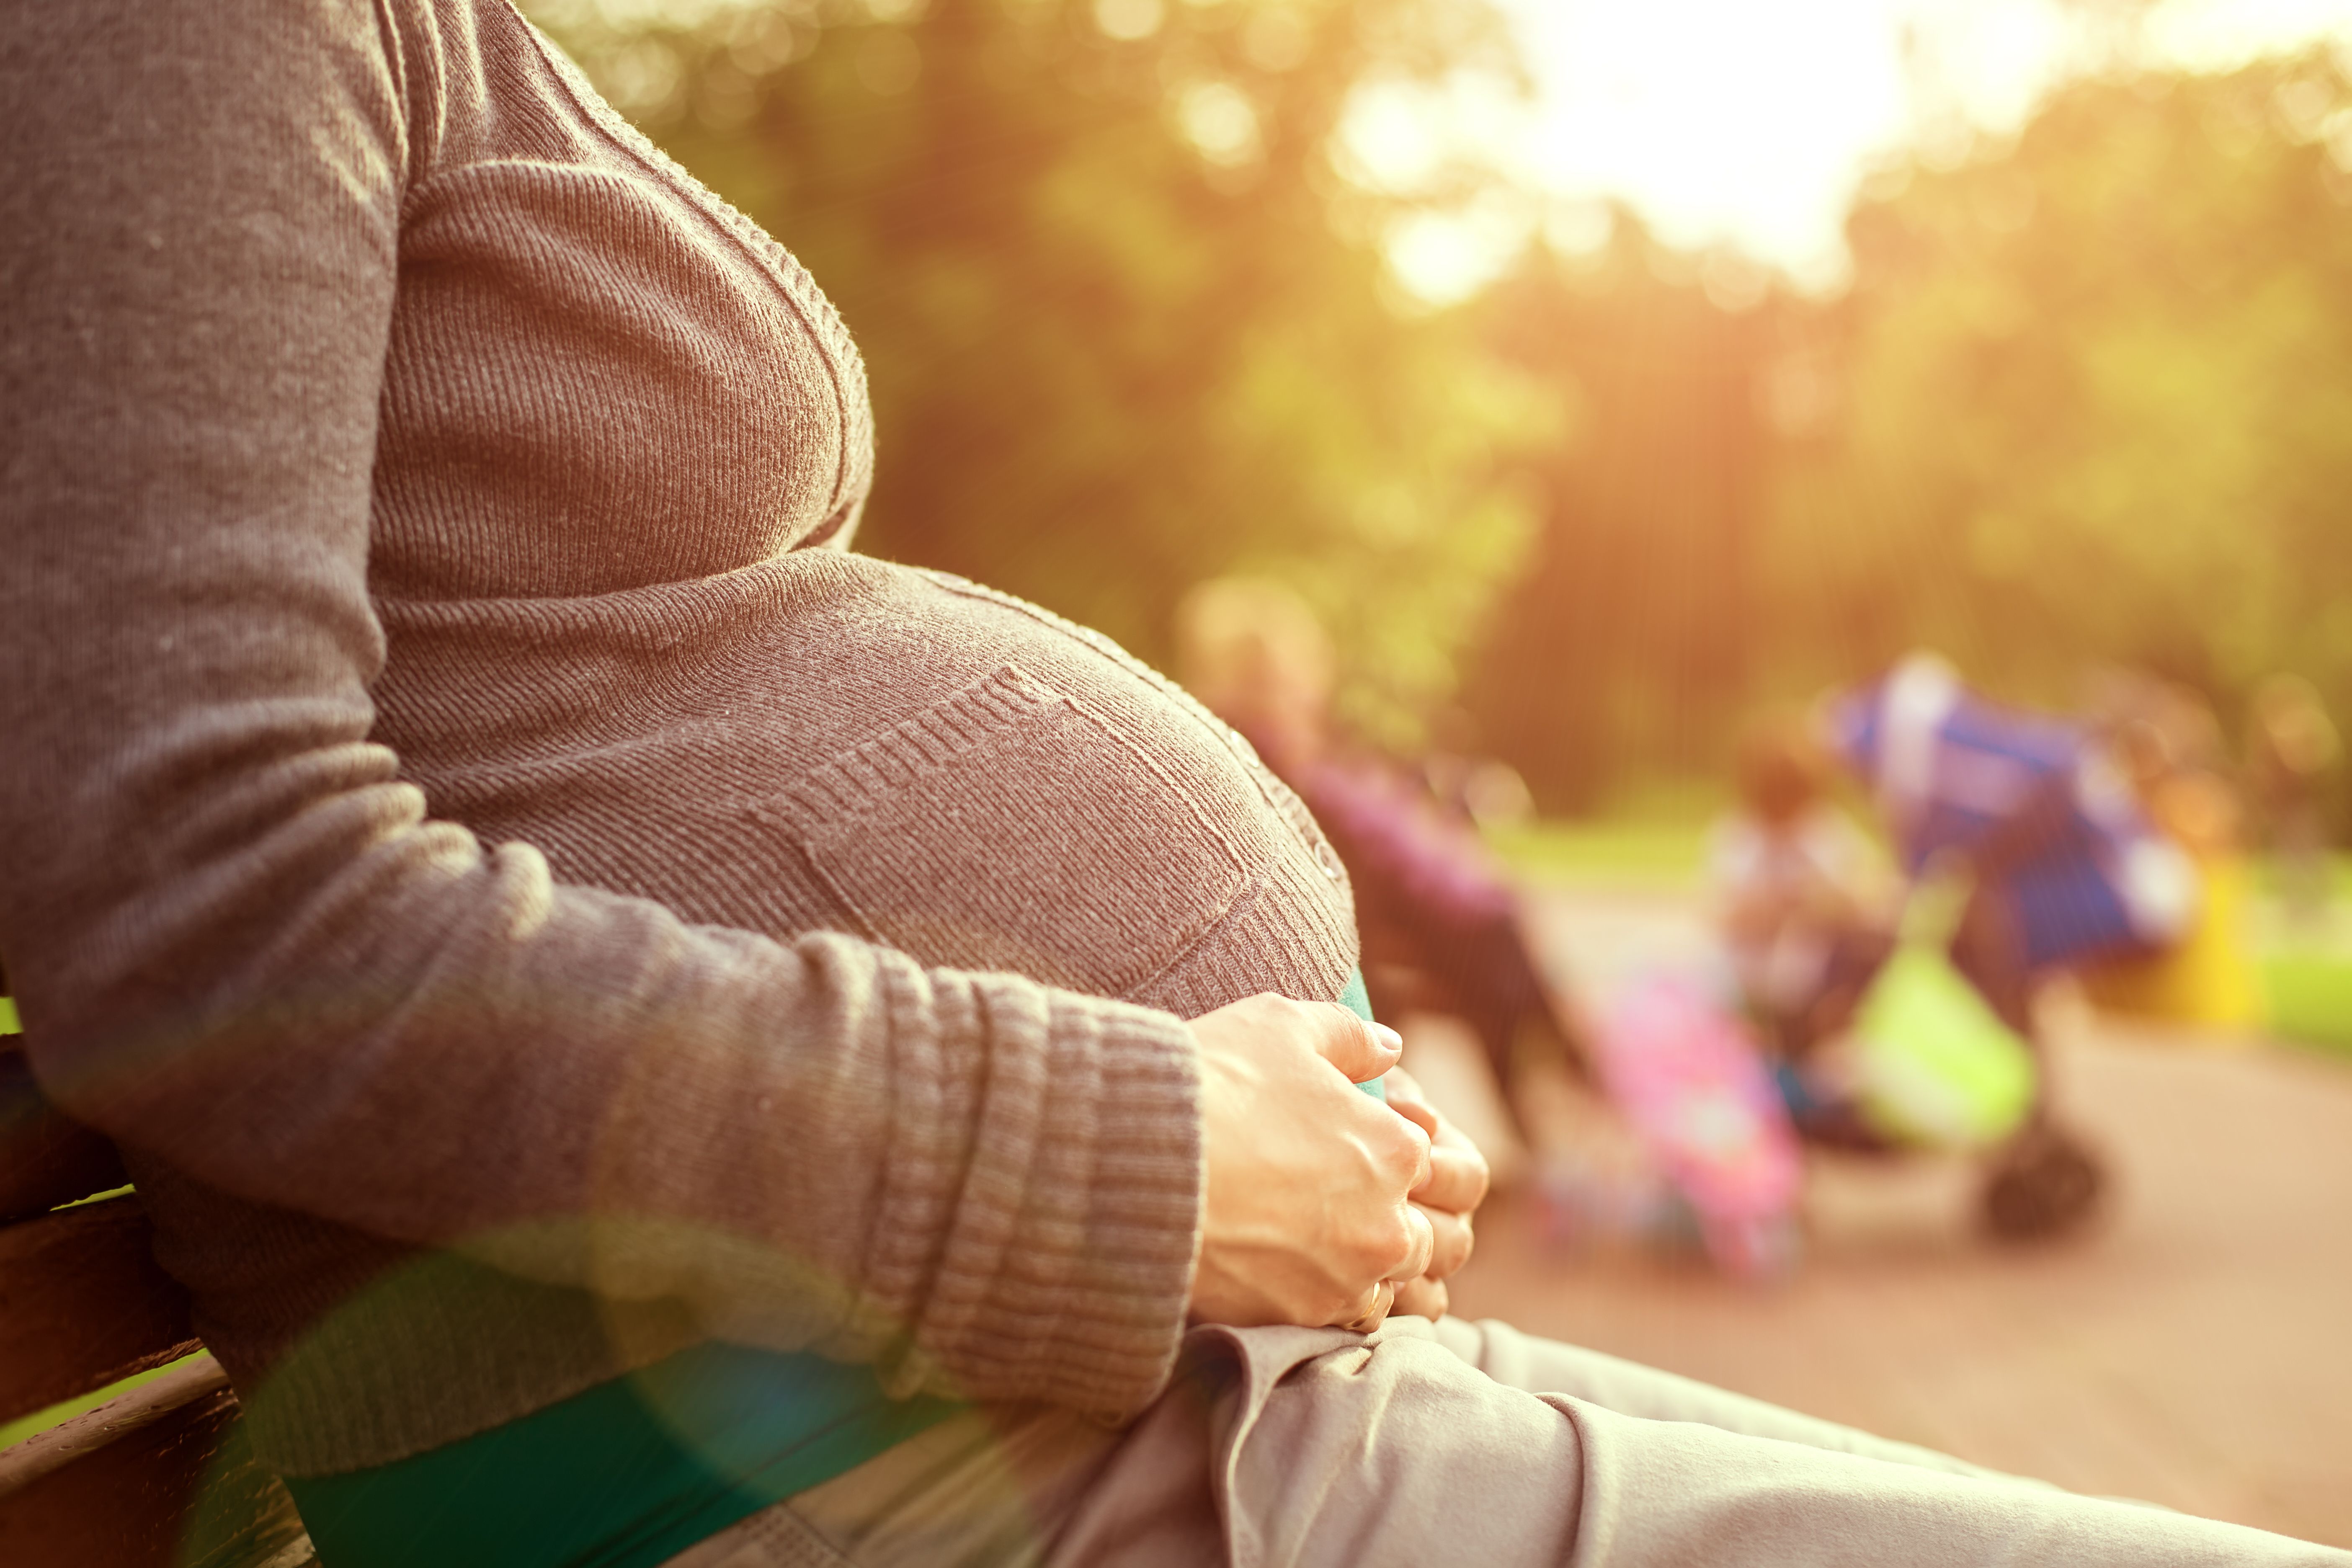 A pregnant woman in the park. | Source: Shutterstock